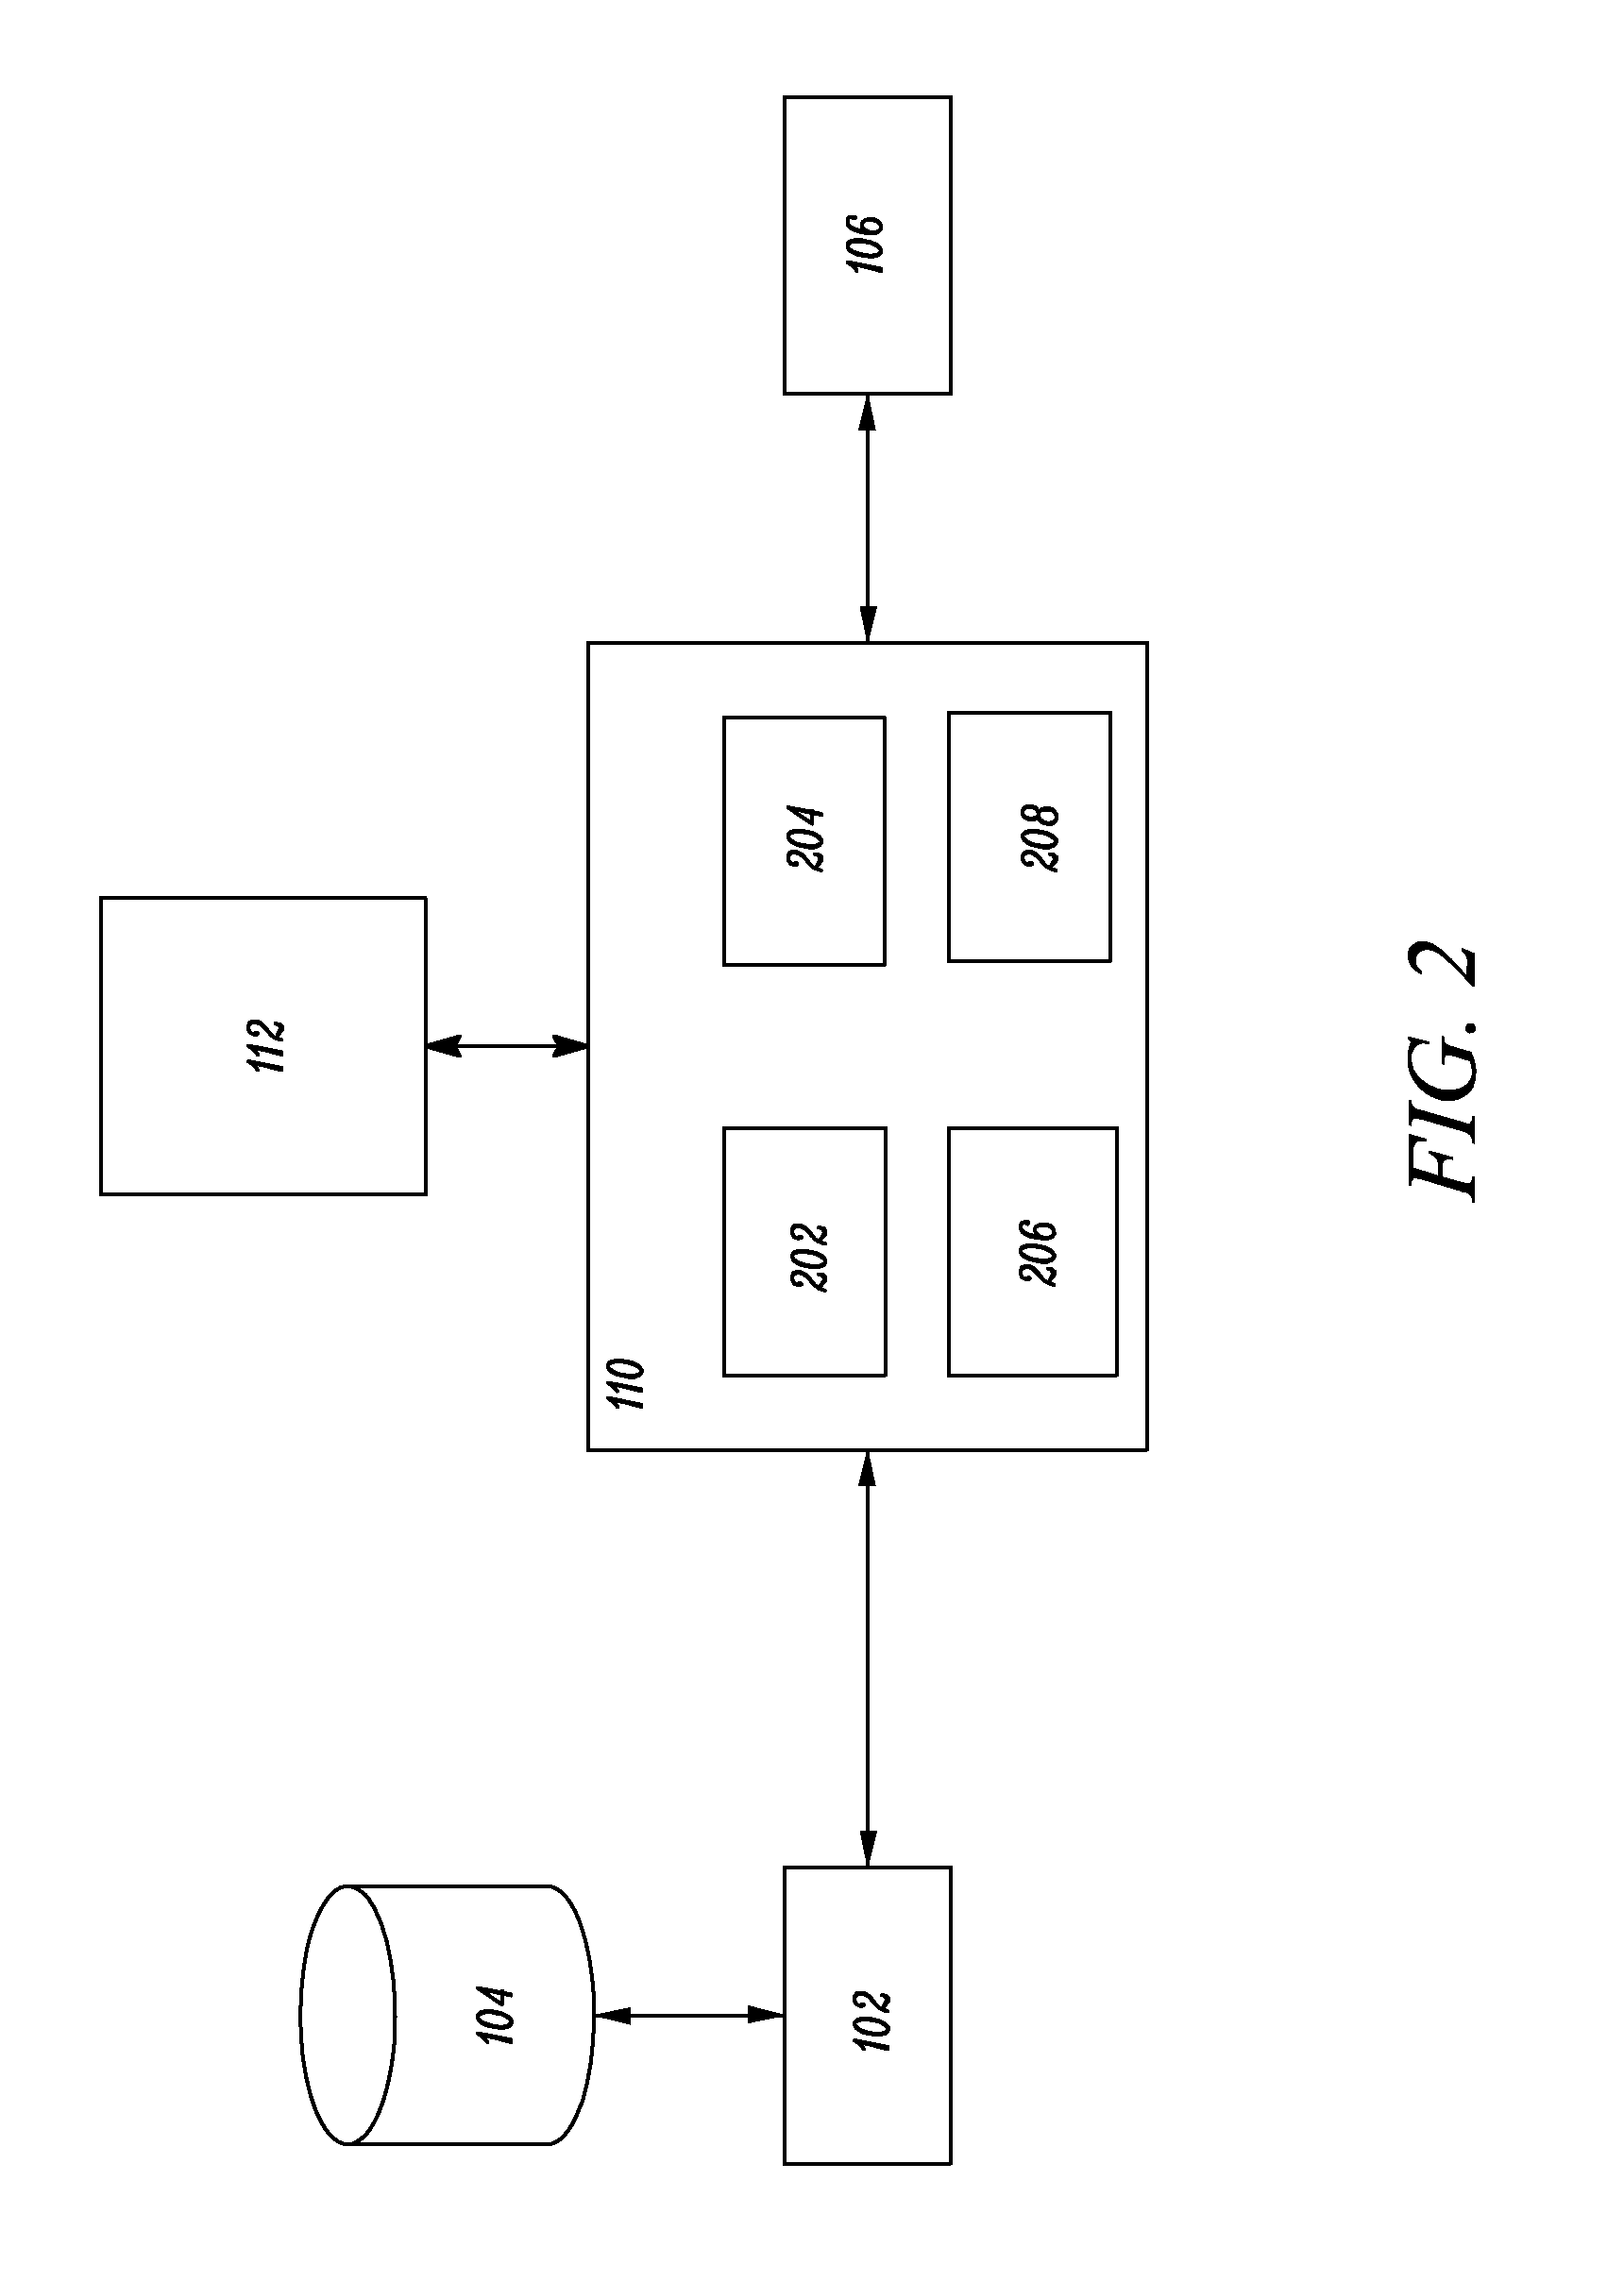 Graphical user interface for failure mode and effect analysis